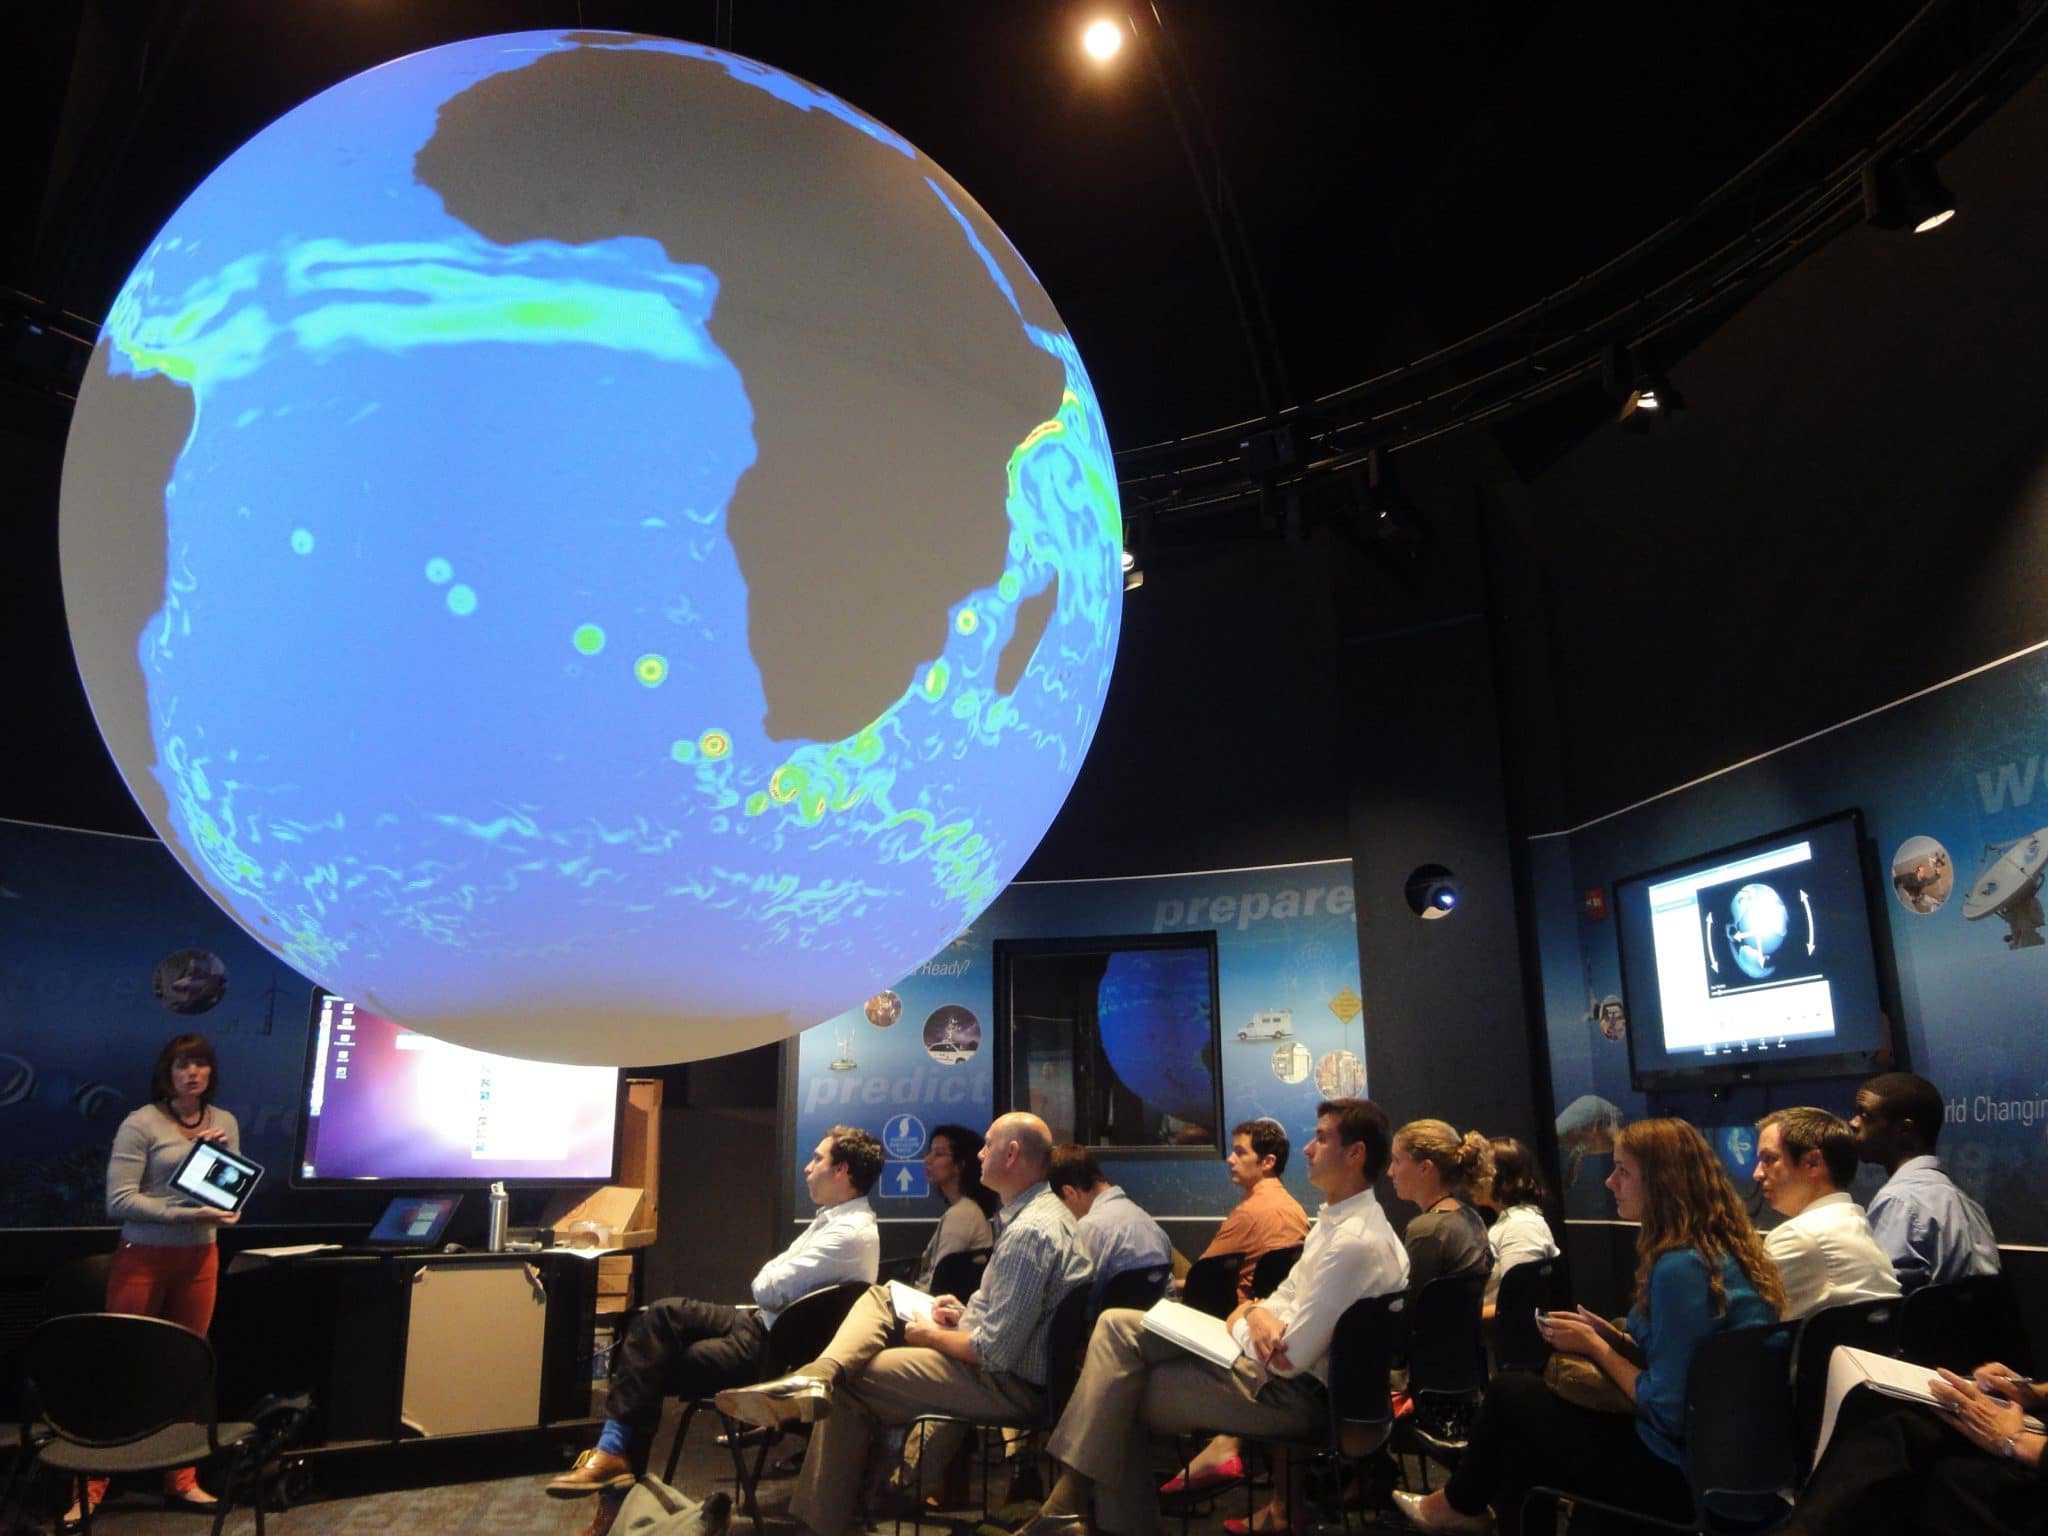 NOAA's Science On a Sphere upgrades to 4K